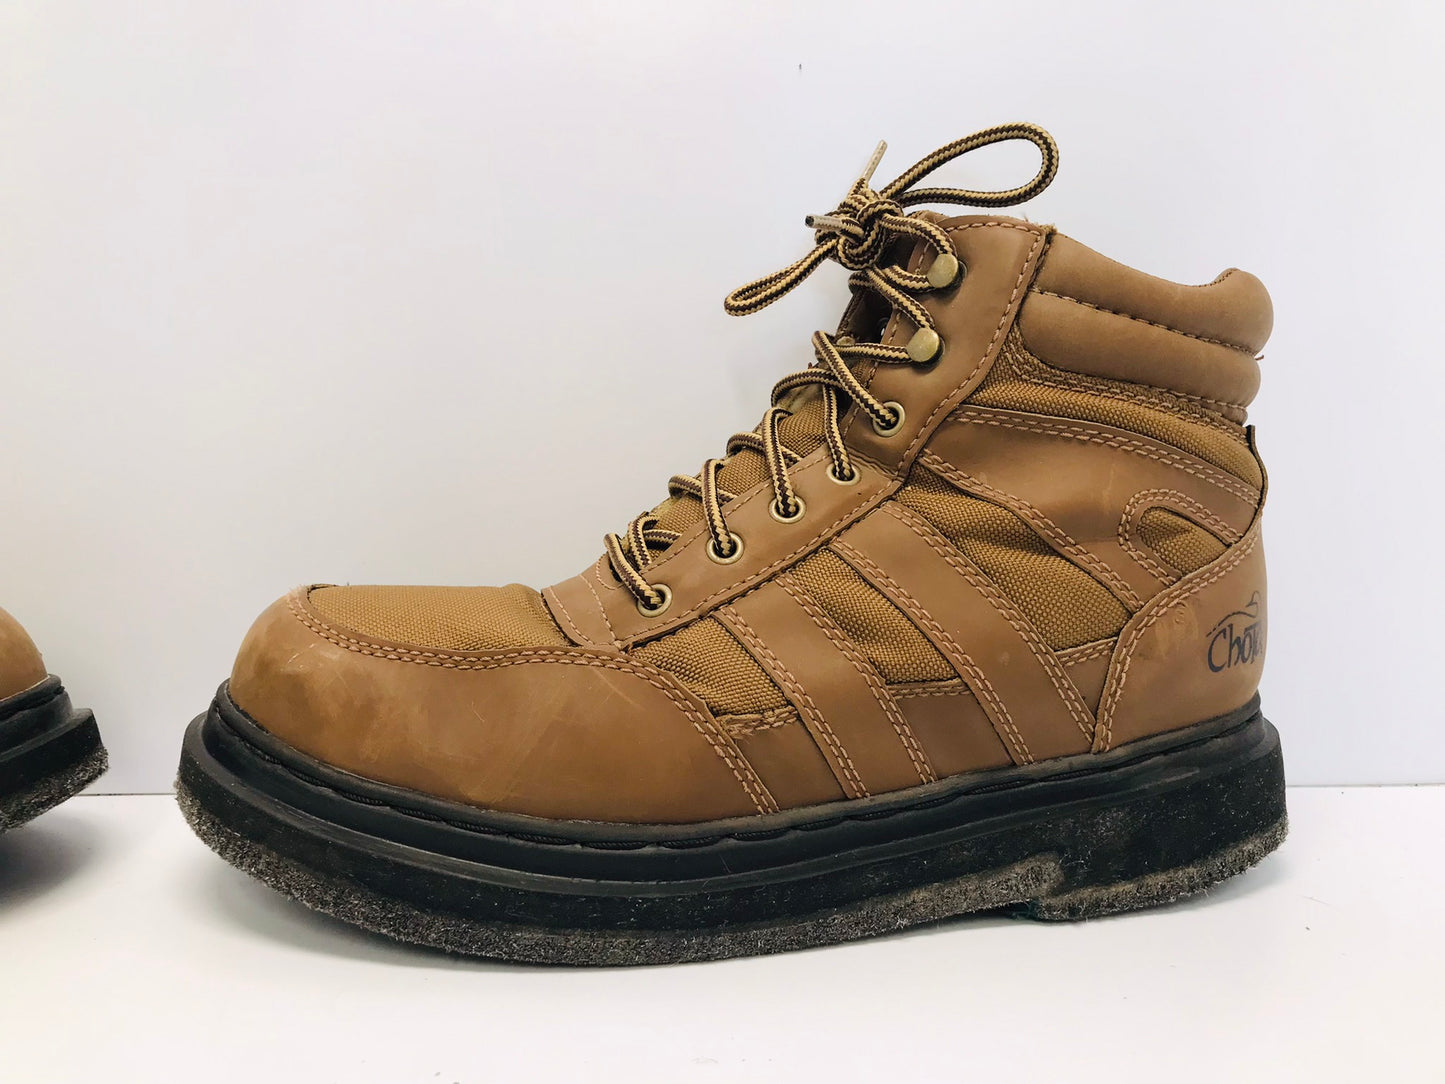 Fishing Adventures Chota Boots Men's Size 10 Wading Fly Fishing Boots with Felt Sole Excellent